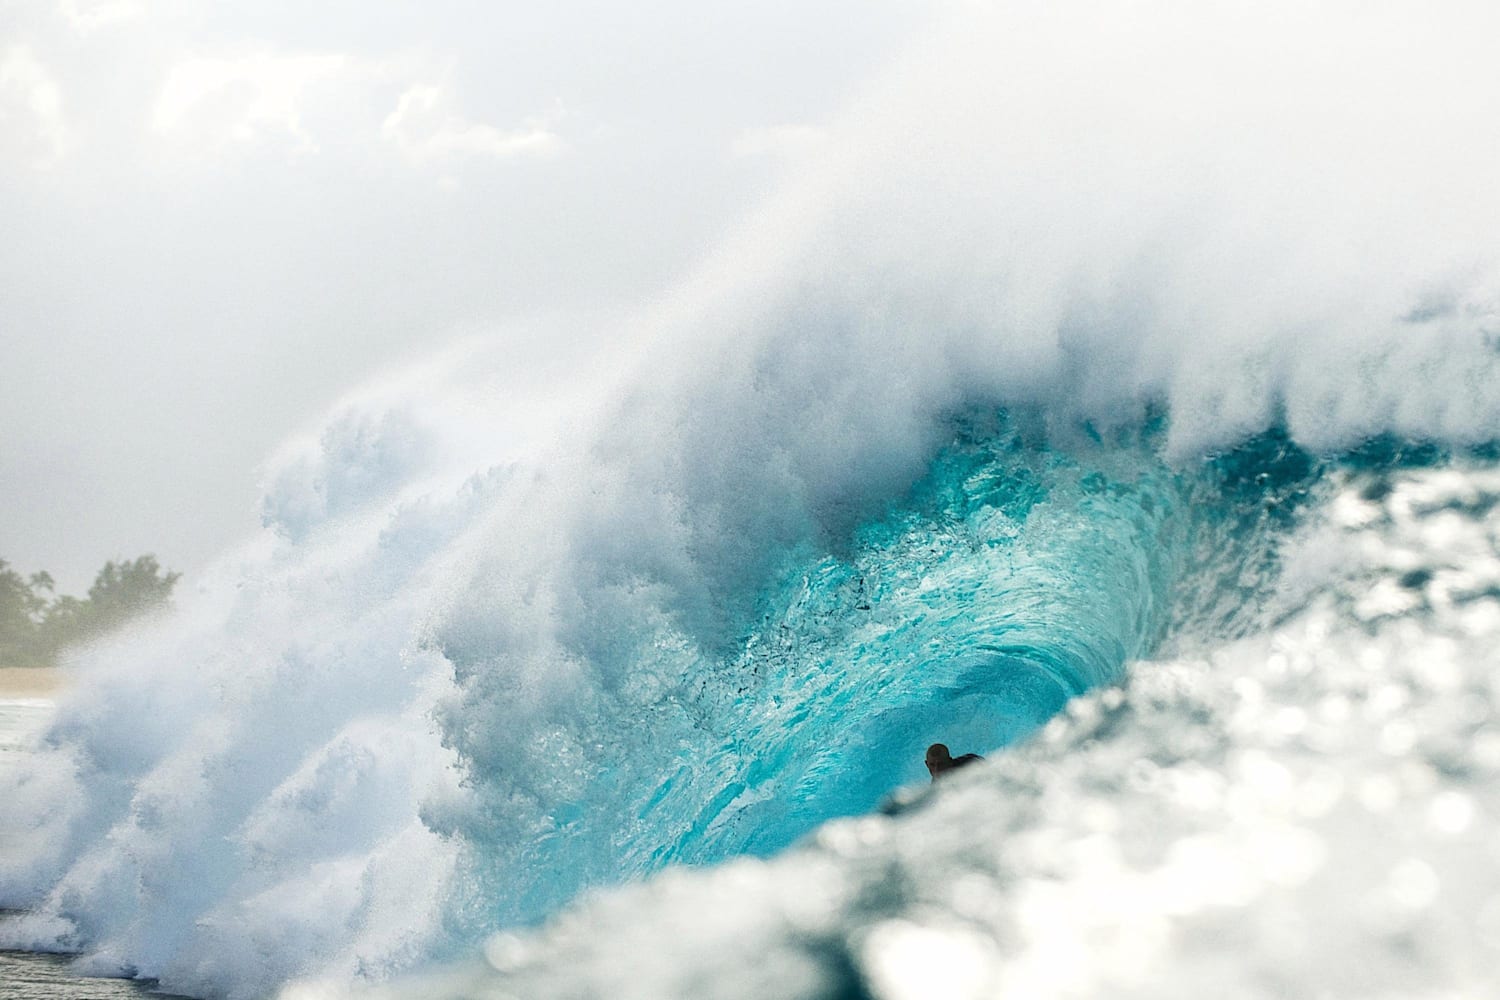 The psychology of professional surfing